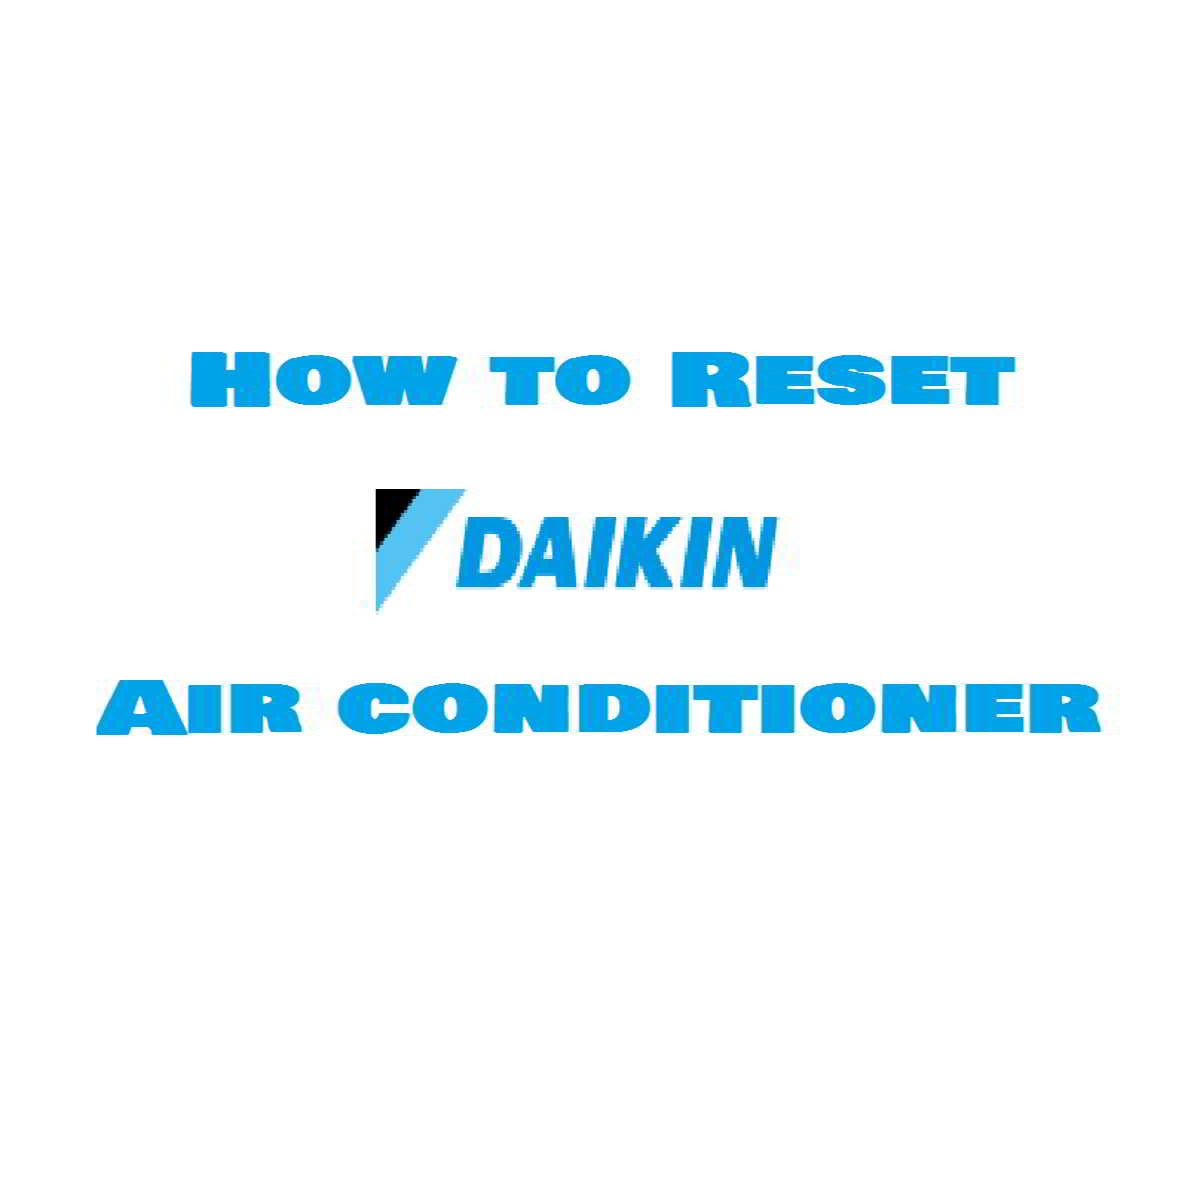 How to reset Daikin Air Conditioner